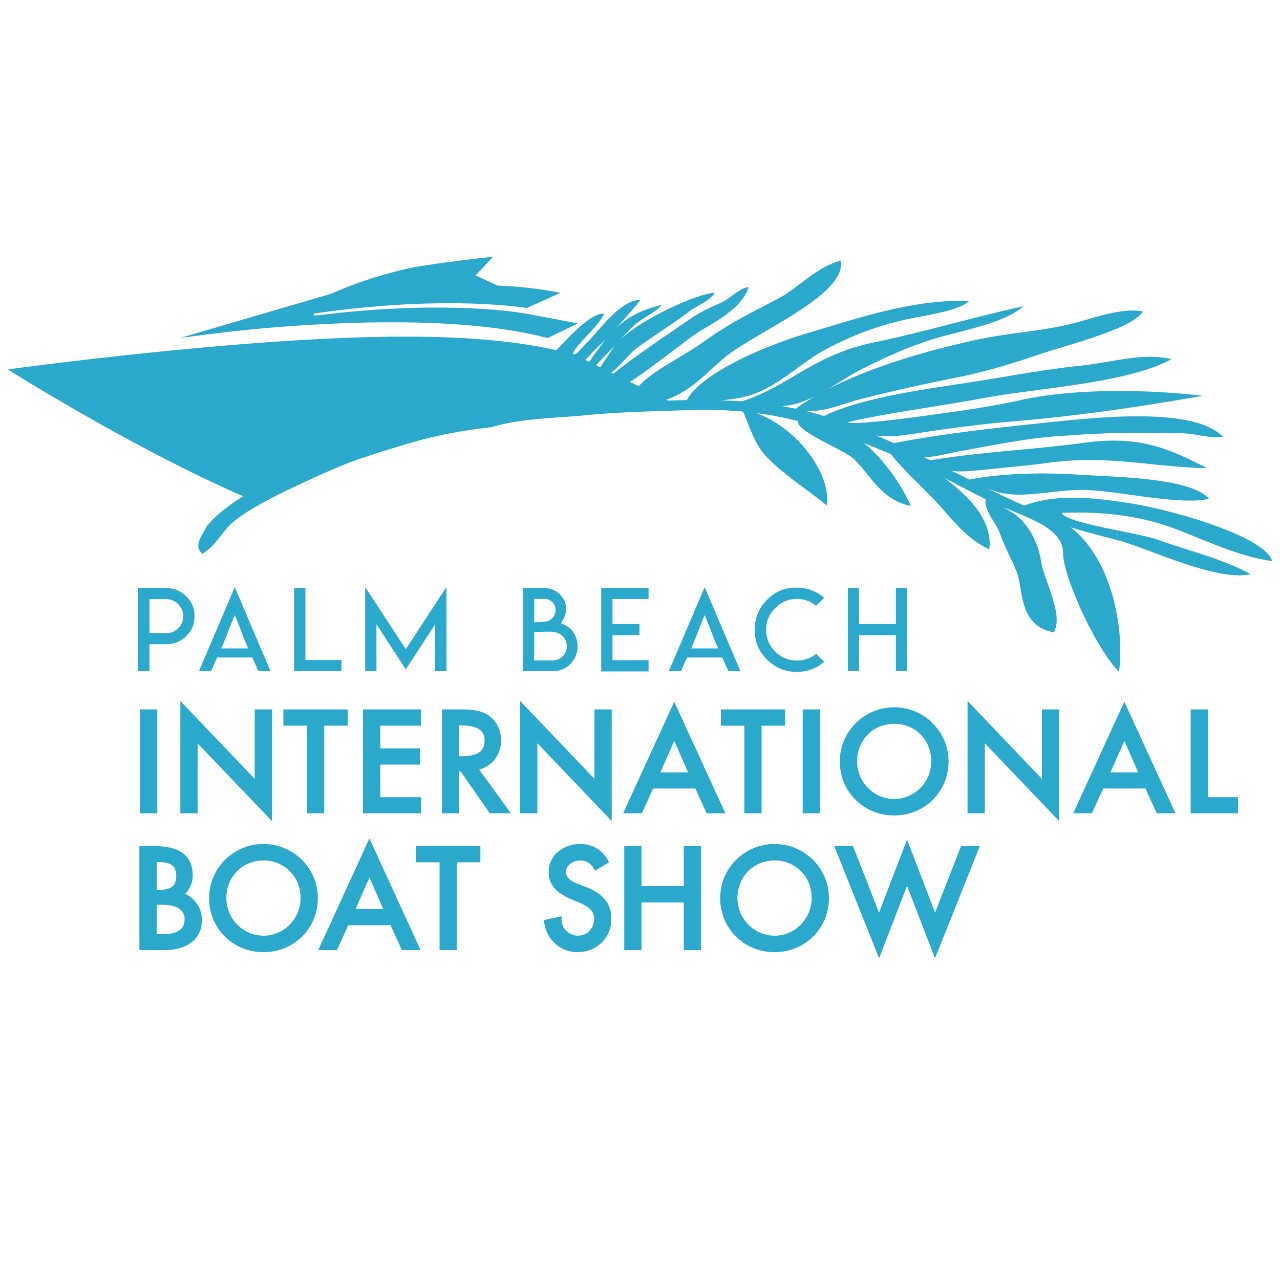 Palm Beach International Boat Show Sees Promising Turnout